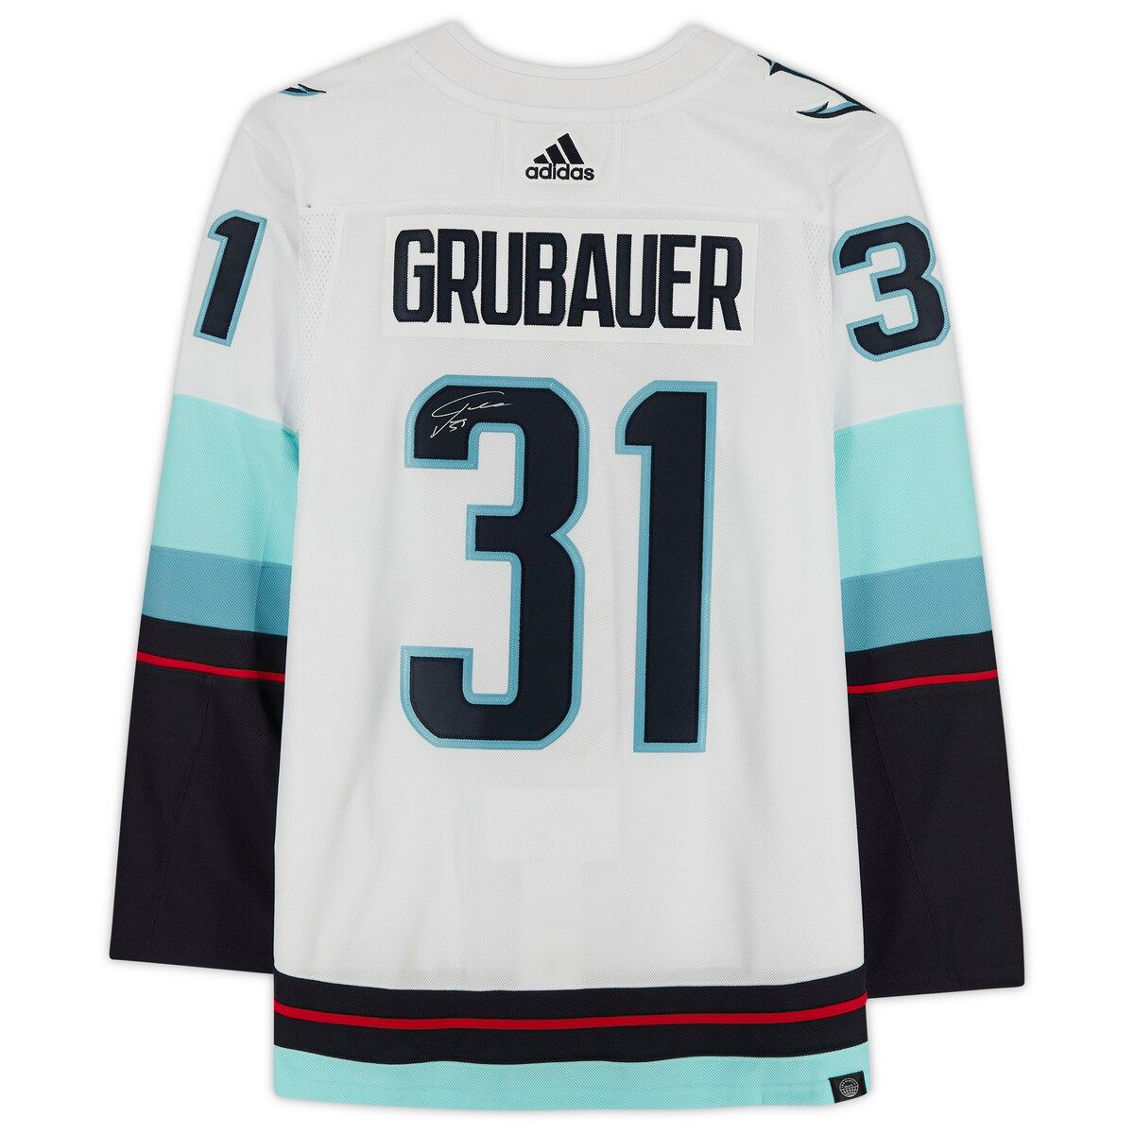 Fanatics Authentic Philipp Grubauer Seattle Kraken Autographed White Authentic Jersey with Inaugural Season Jersey Patch - Image 3 of 4